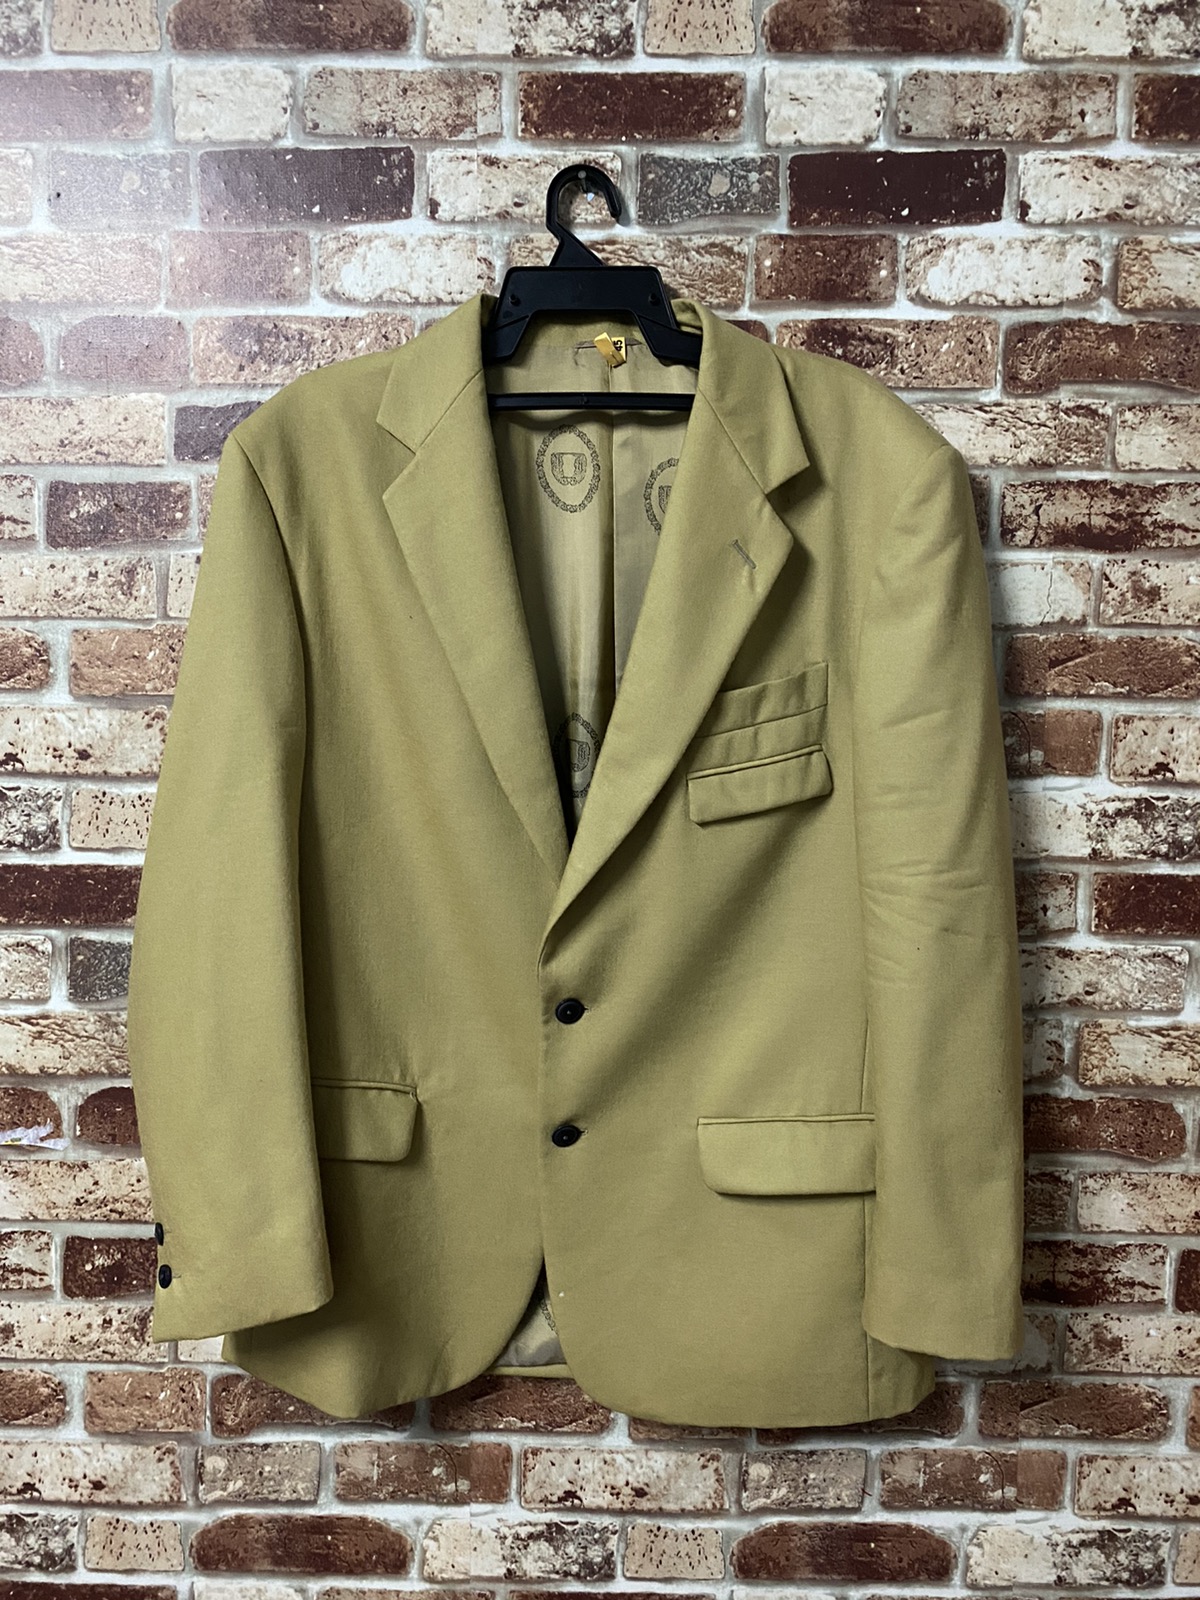 GK132 MESSORI MADE IN ITALY JACKET - 1